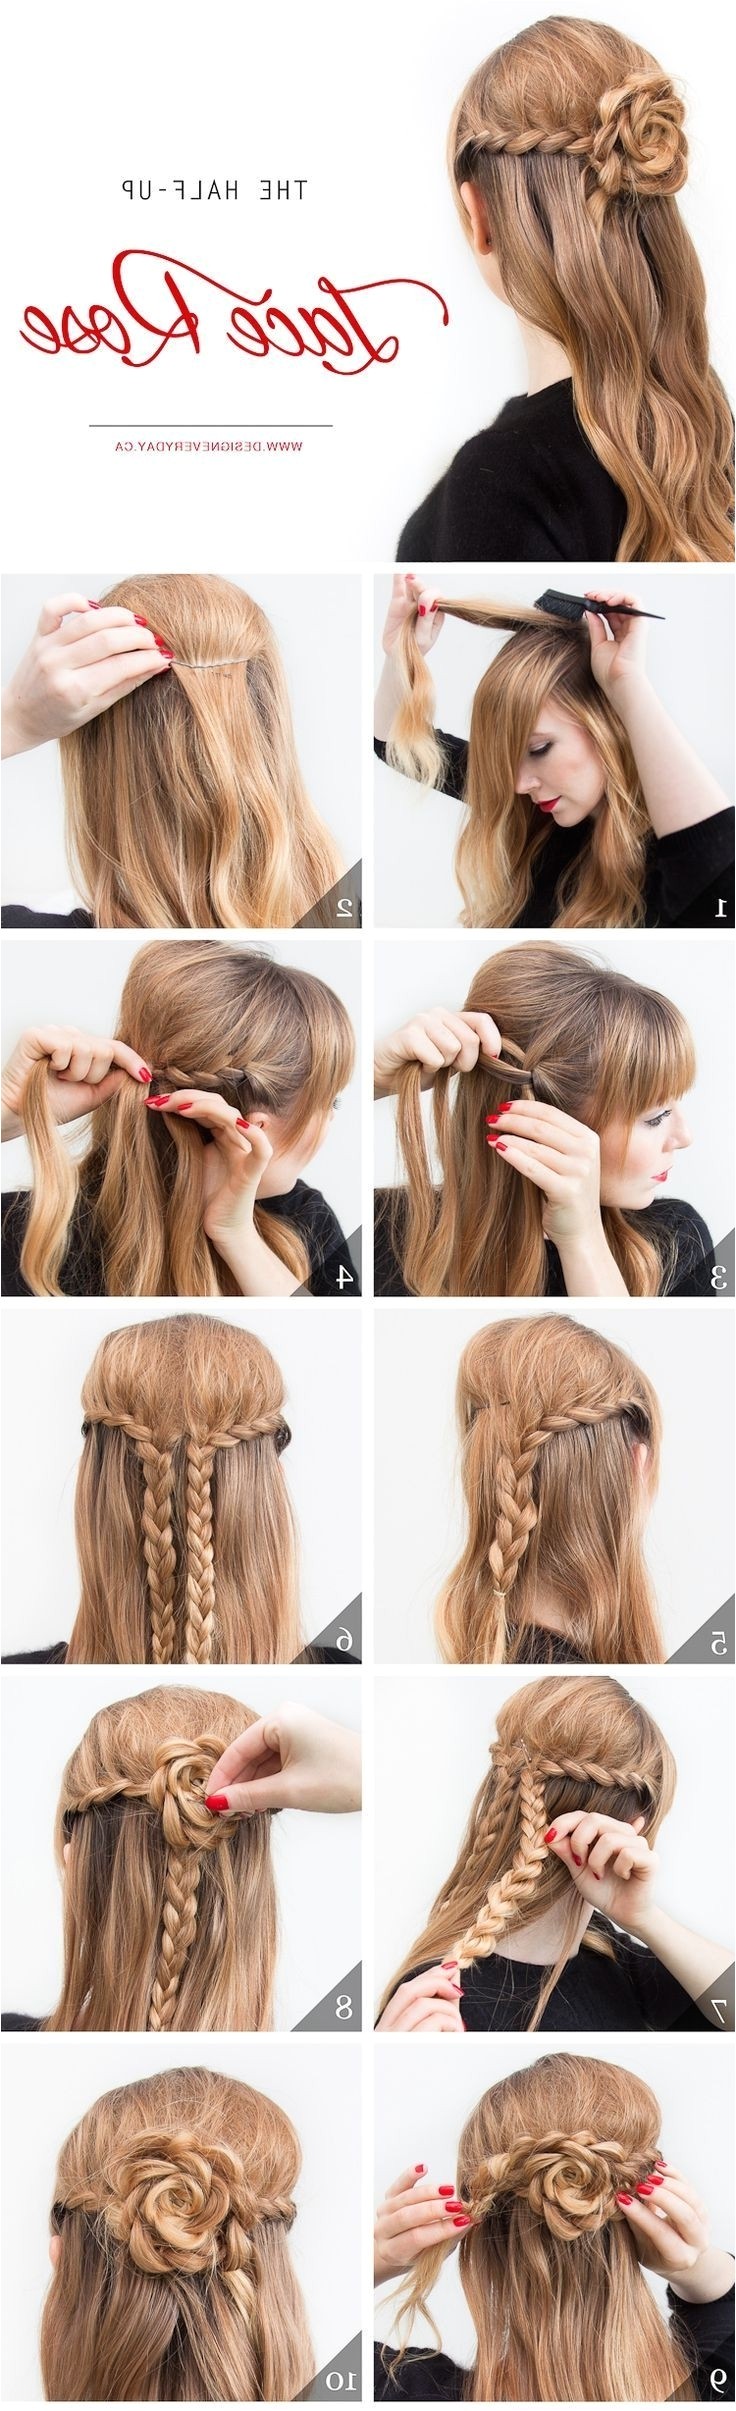 hairstyles for church easy